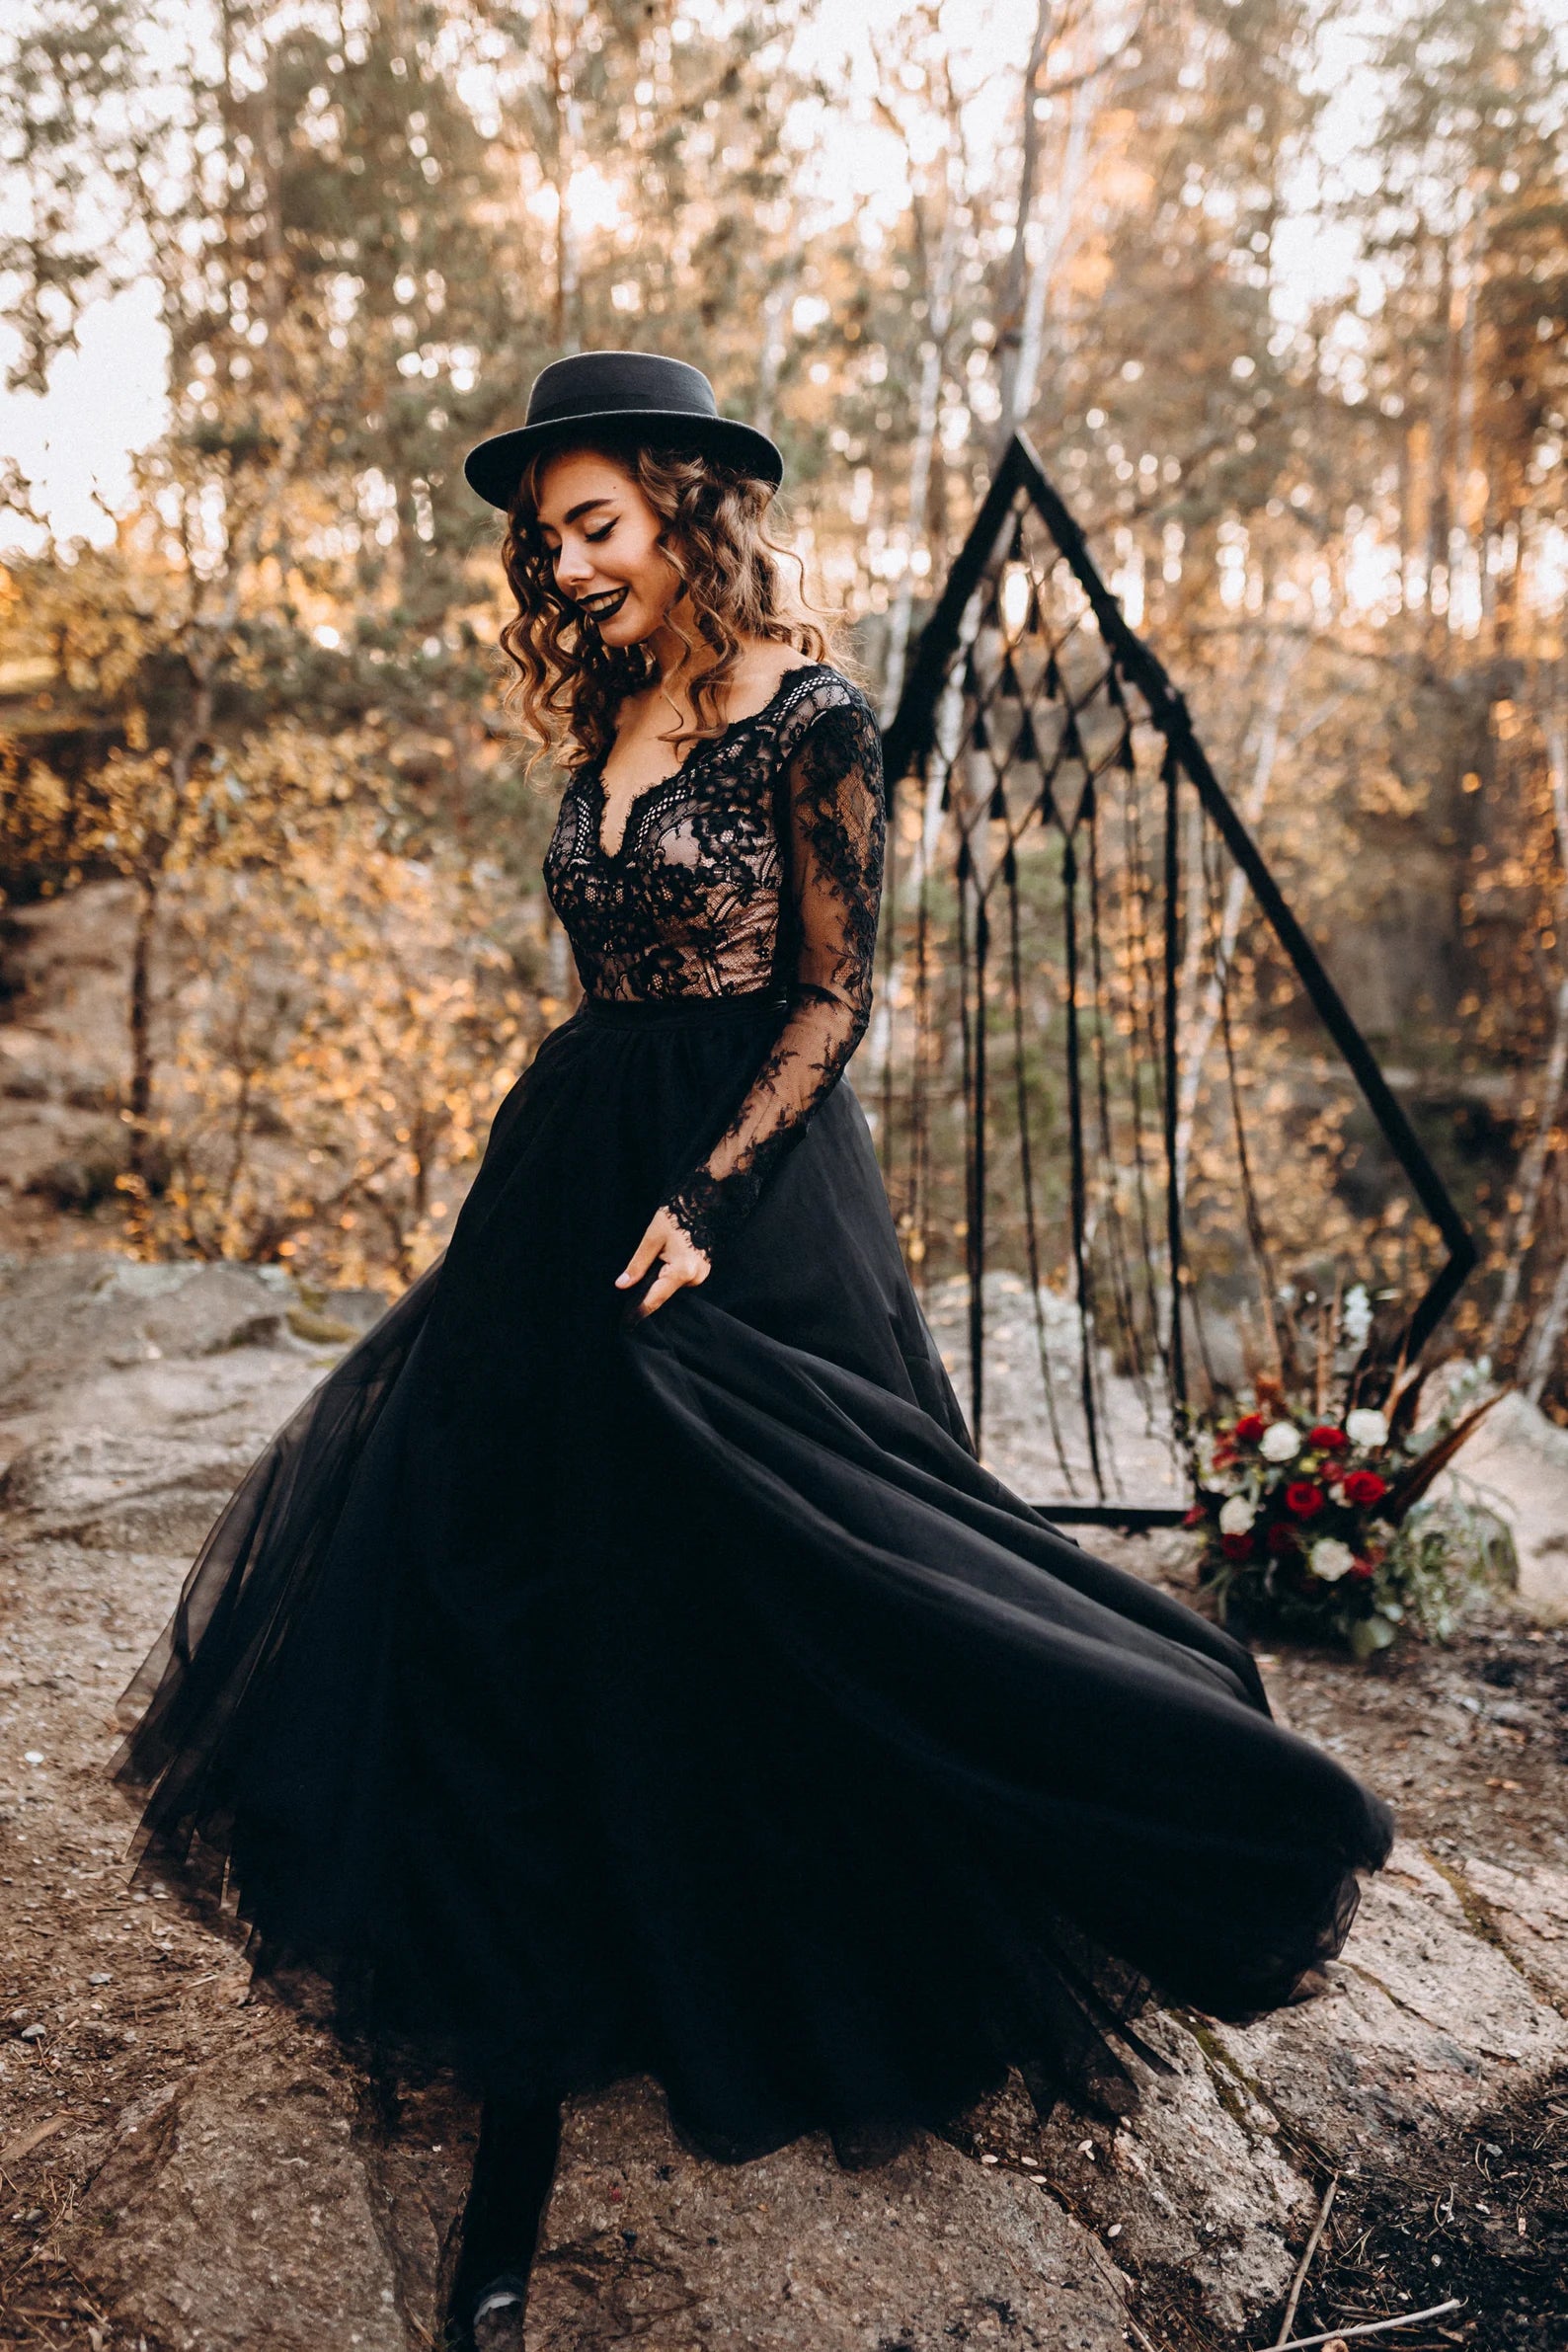 Long Sleeves A-line Wedding Dresses, Black Lace Fashion Bridal Gowns, Newest Wedding Dresses